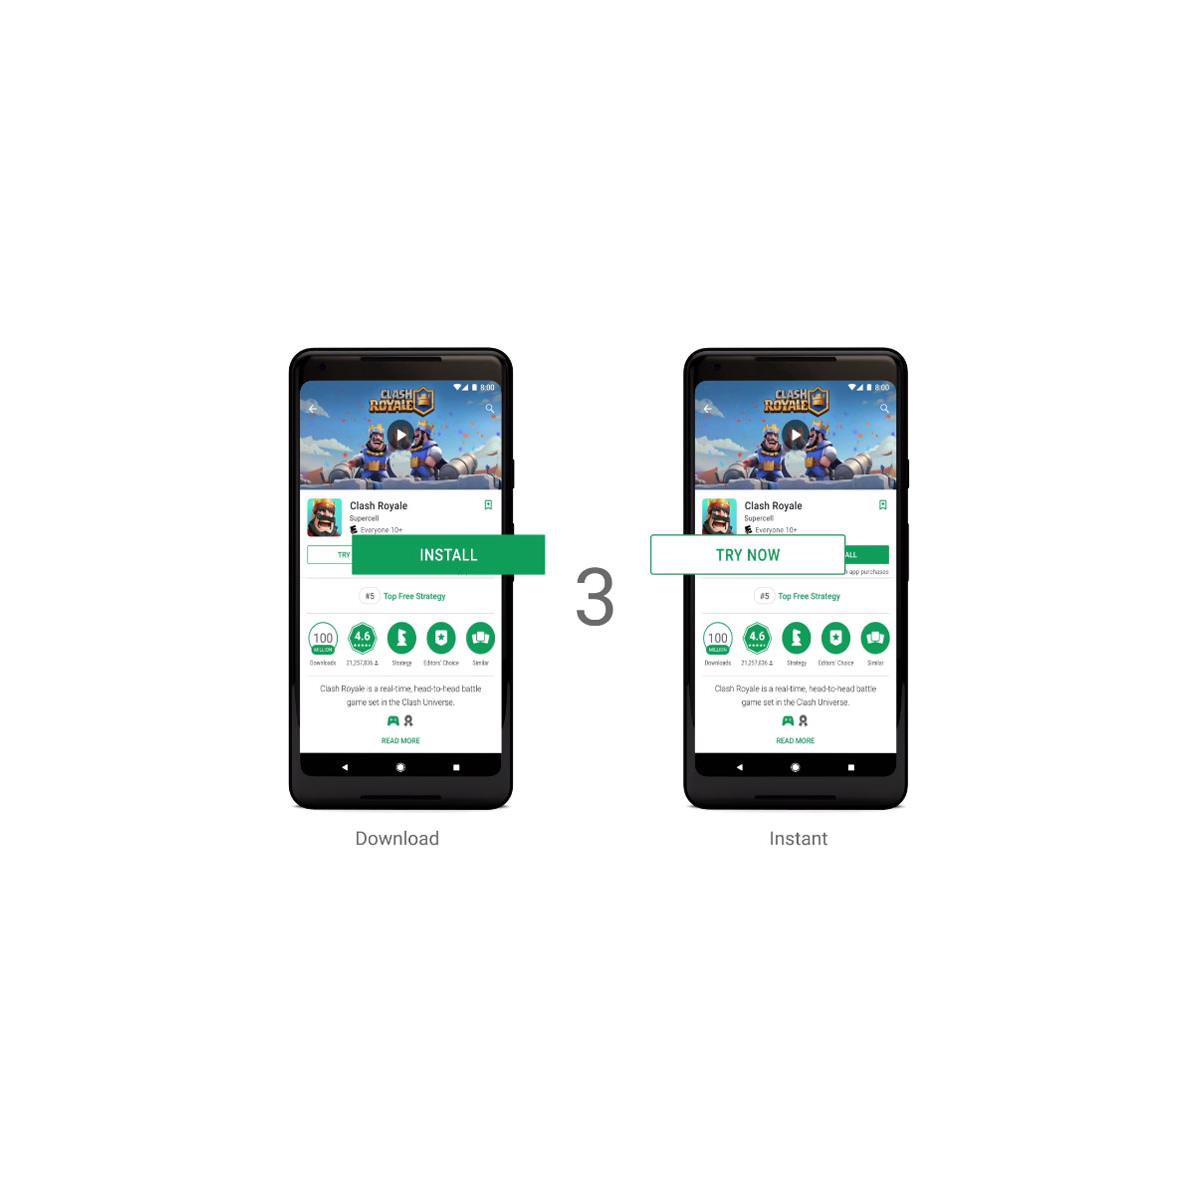 Google Play Instant for Android will allow users to try a game